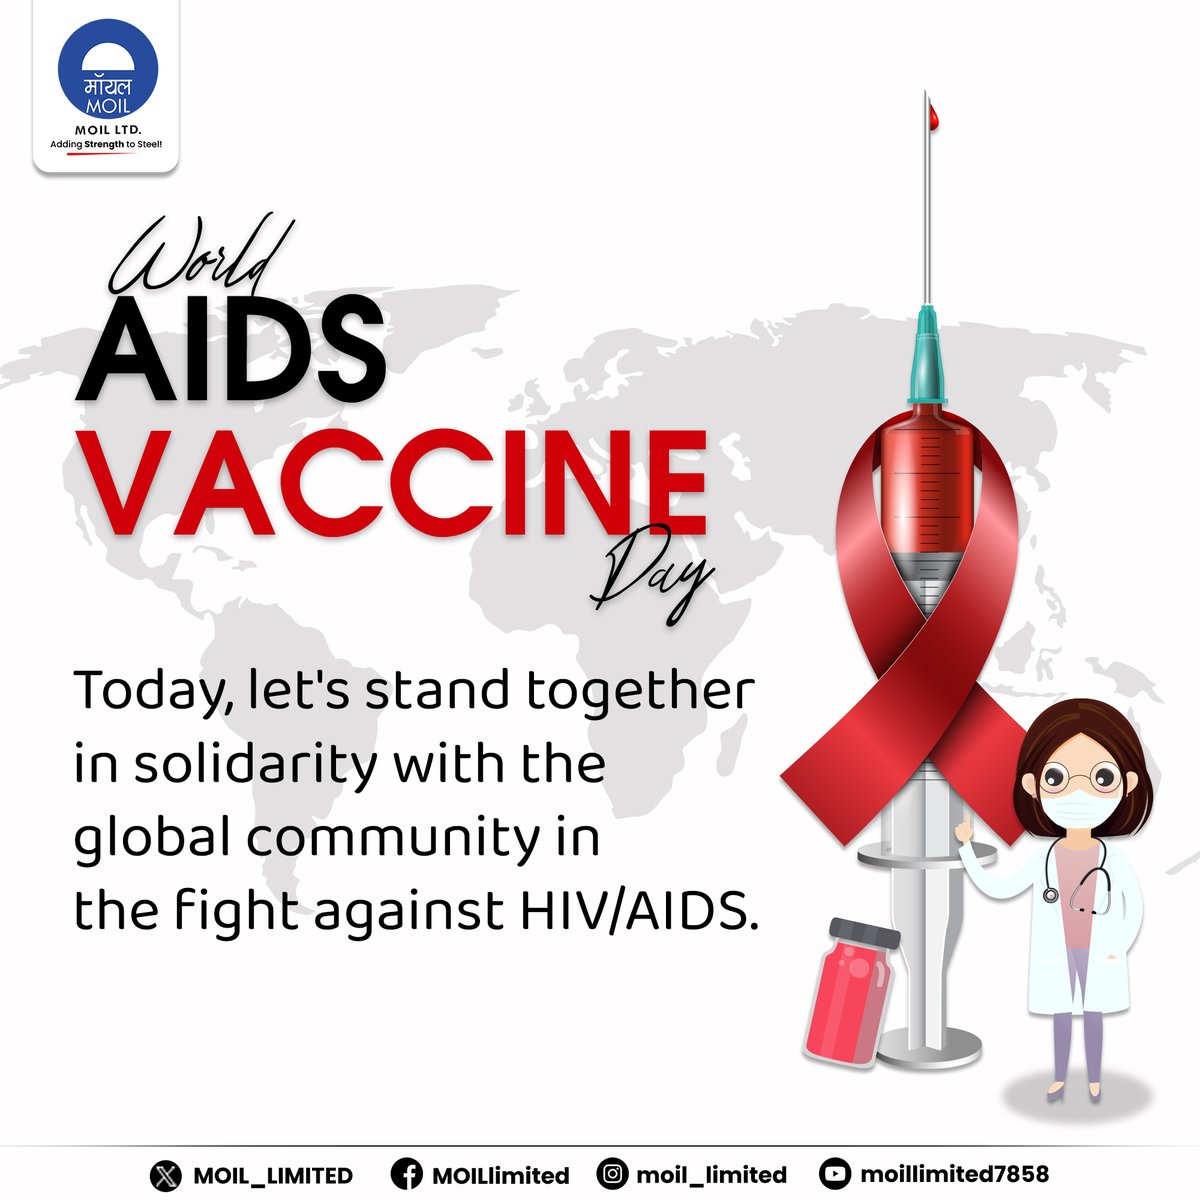 On World AIDS Vaccine Day, we recognize the relentless pursuit of science and the shared hope for a future without HIV/AIDS. #AIDSVaccineDay #MOIL #HarEkKaamDeshKeNaam